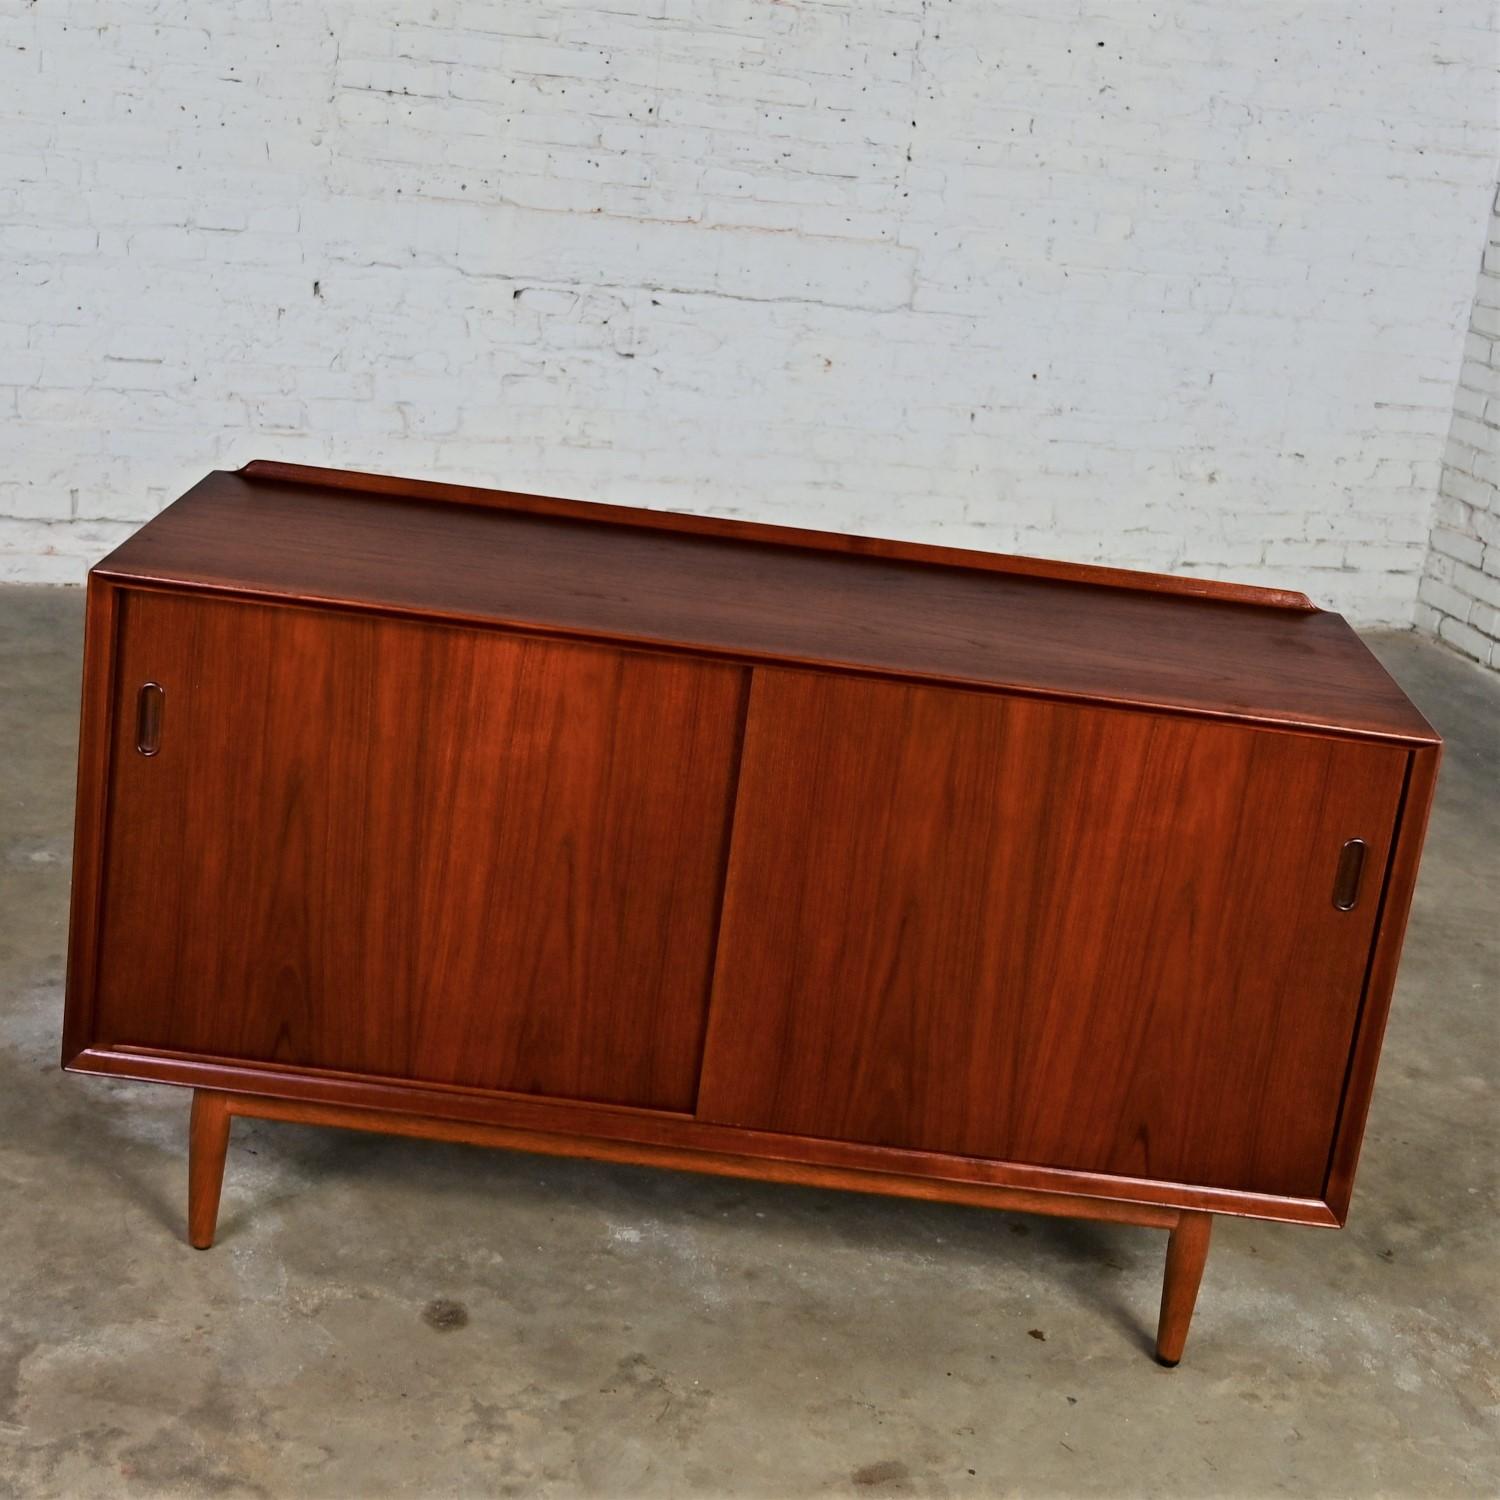  Handsome vintage Scandinavian Modern Sibast No 11 sideboard, buffet, credenza by Arne Vodder for George Tanier comprised of a teak frame, round tapered legs, light birch adjustable interiors, and sliding bypass reversible doors teak on one side and